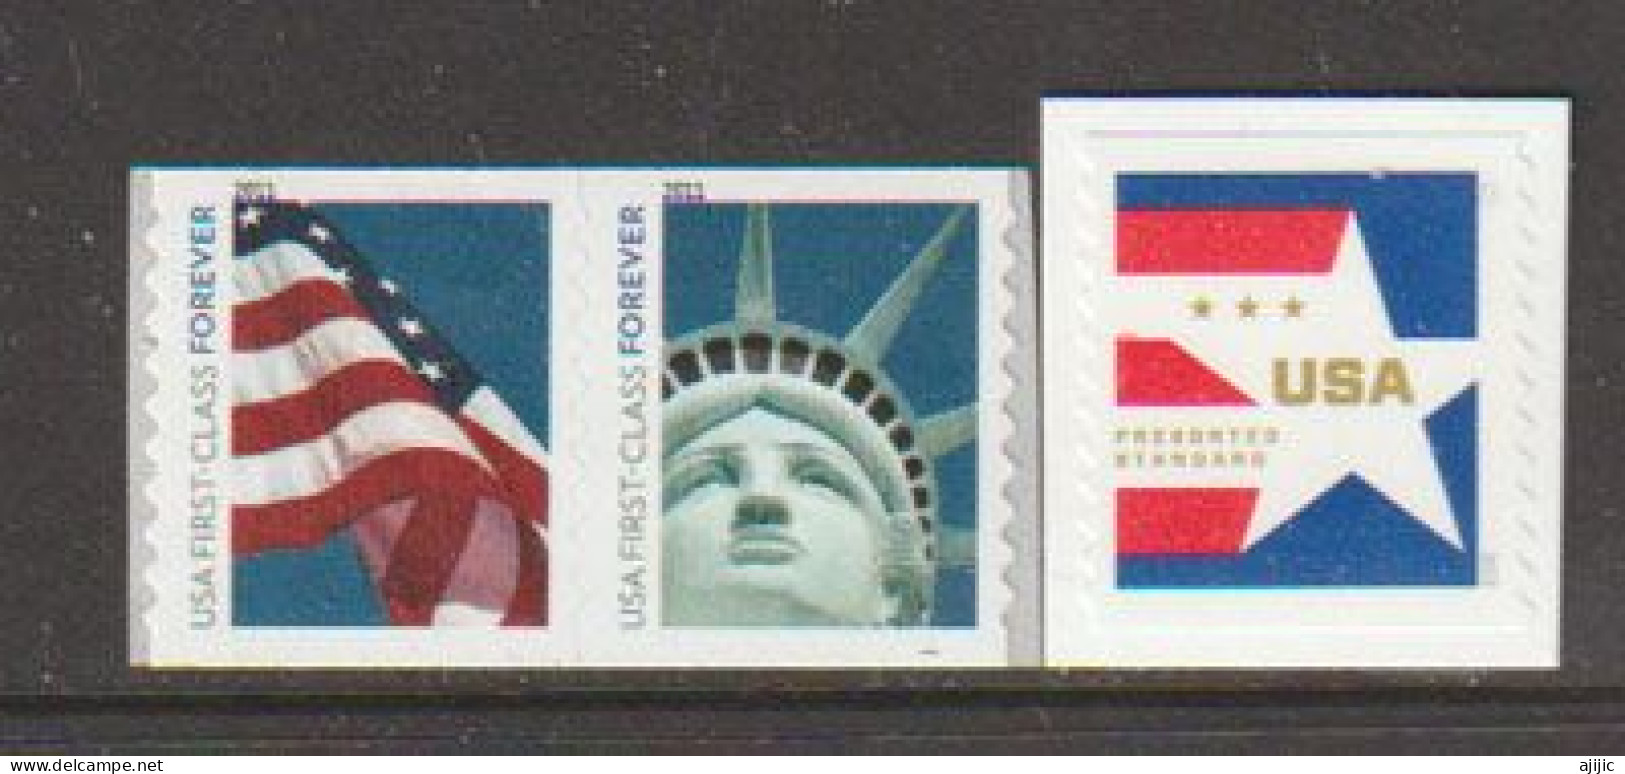 Flags USA (Star-Spangled Banner ) 3  Timbres Neufs **  (First Class Forever Stamps) - Ungebraucht